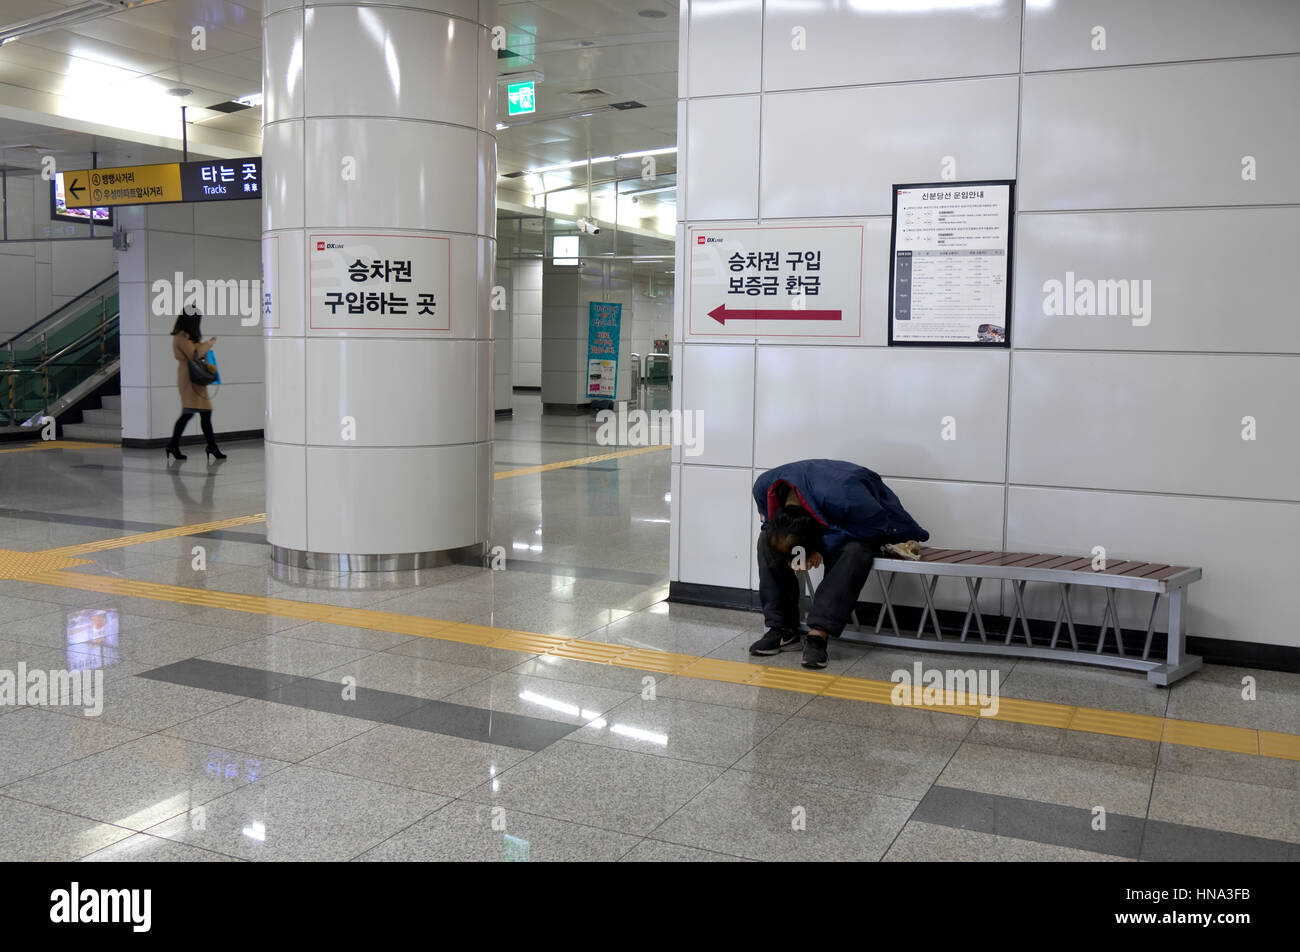 Woman texting on smartphone and homeless man sleeping on a bench in underground subway train station. Seoul, South Korea, Asia Stock Photo